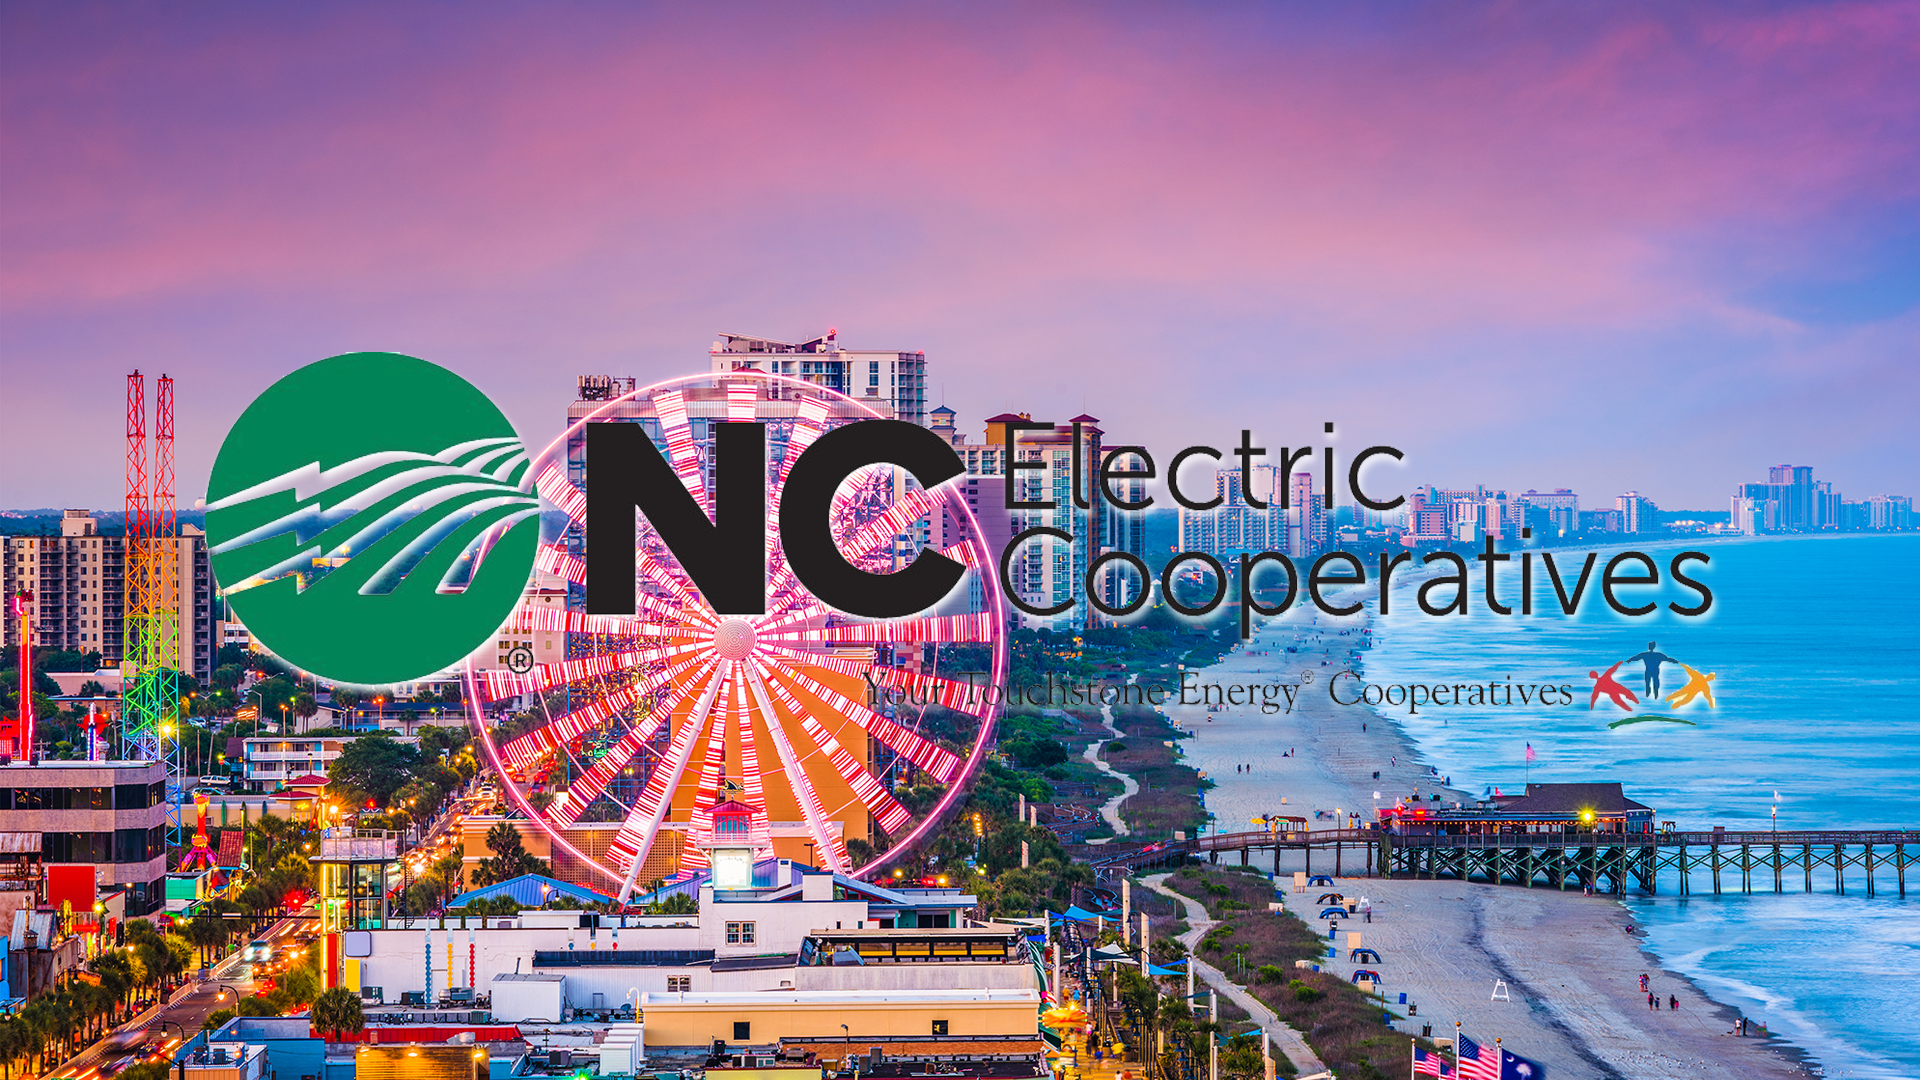 Cooperative Technologies Conference and Expo (CTCE), Myrtle Beach, SC